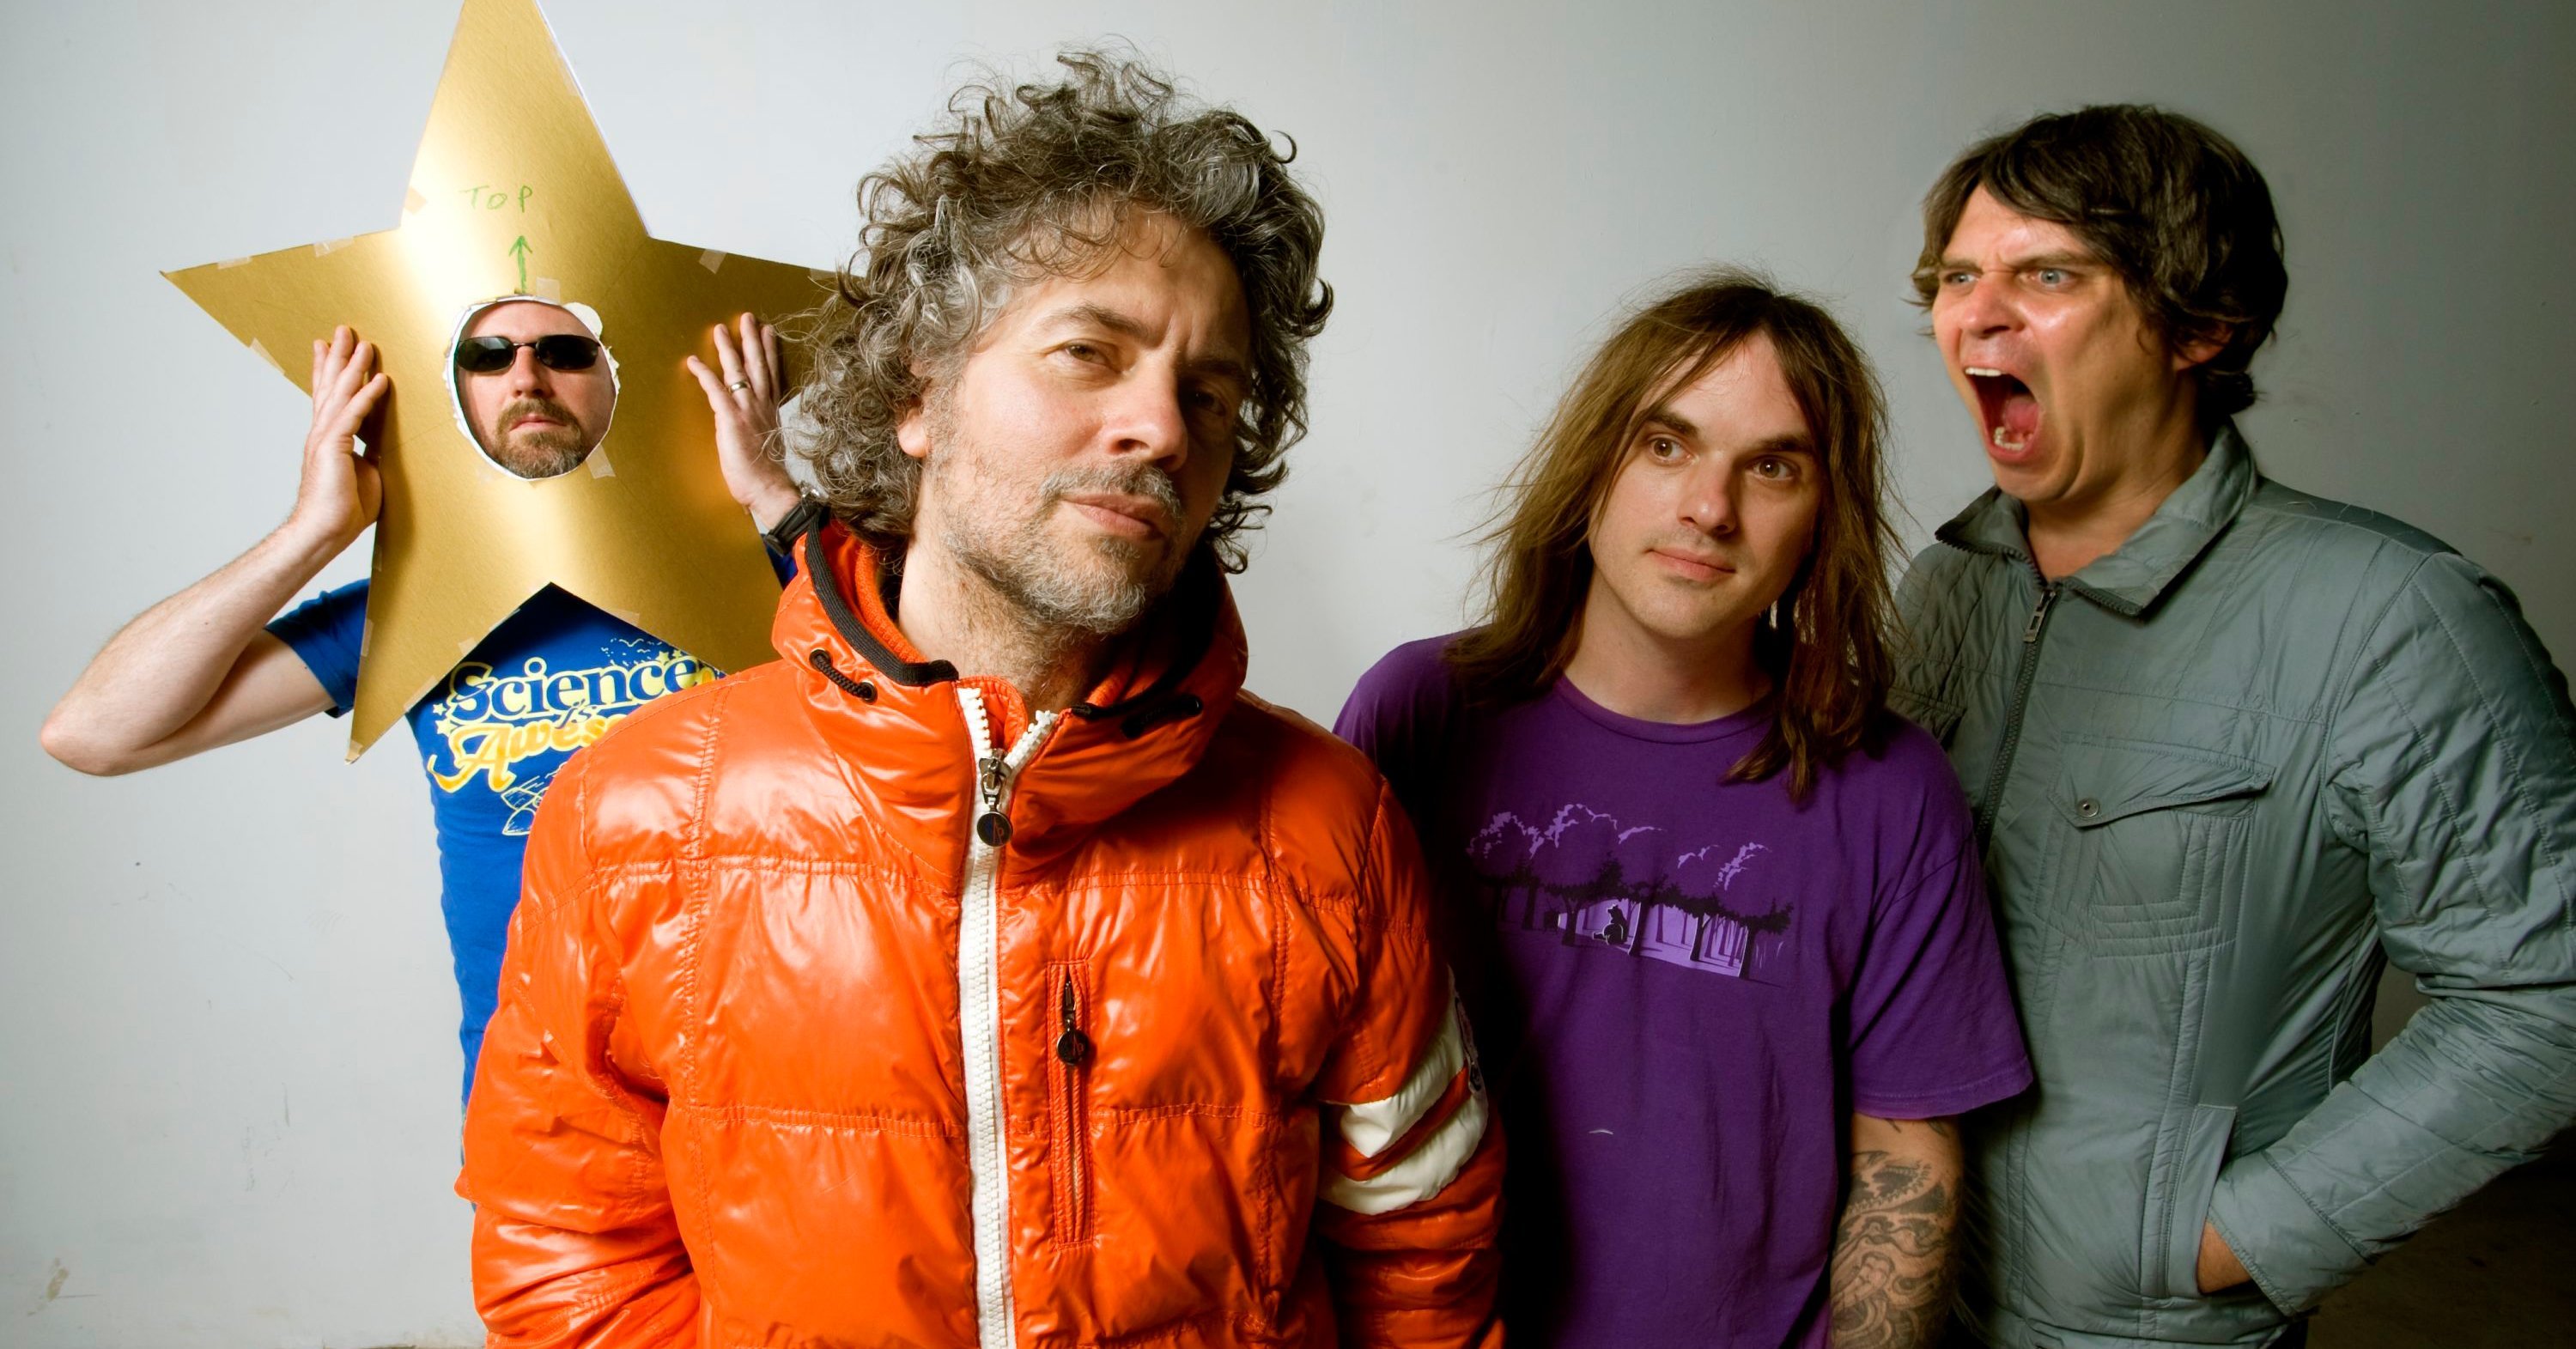 Flaming Lips Backgrounds, Compatible - PC, Mobile, Gadgets| 3000x1571 px